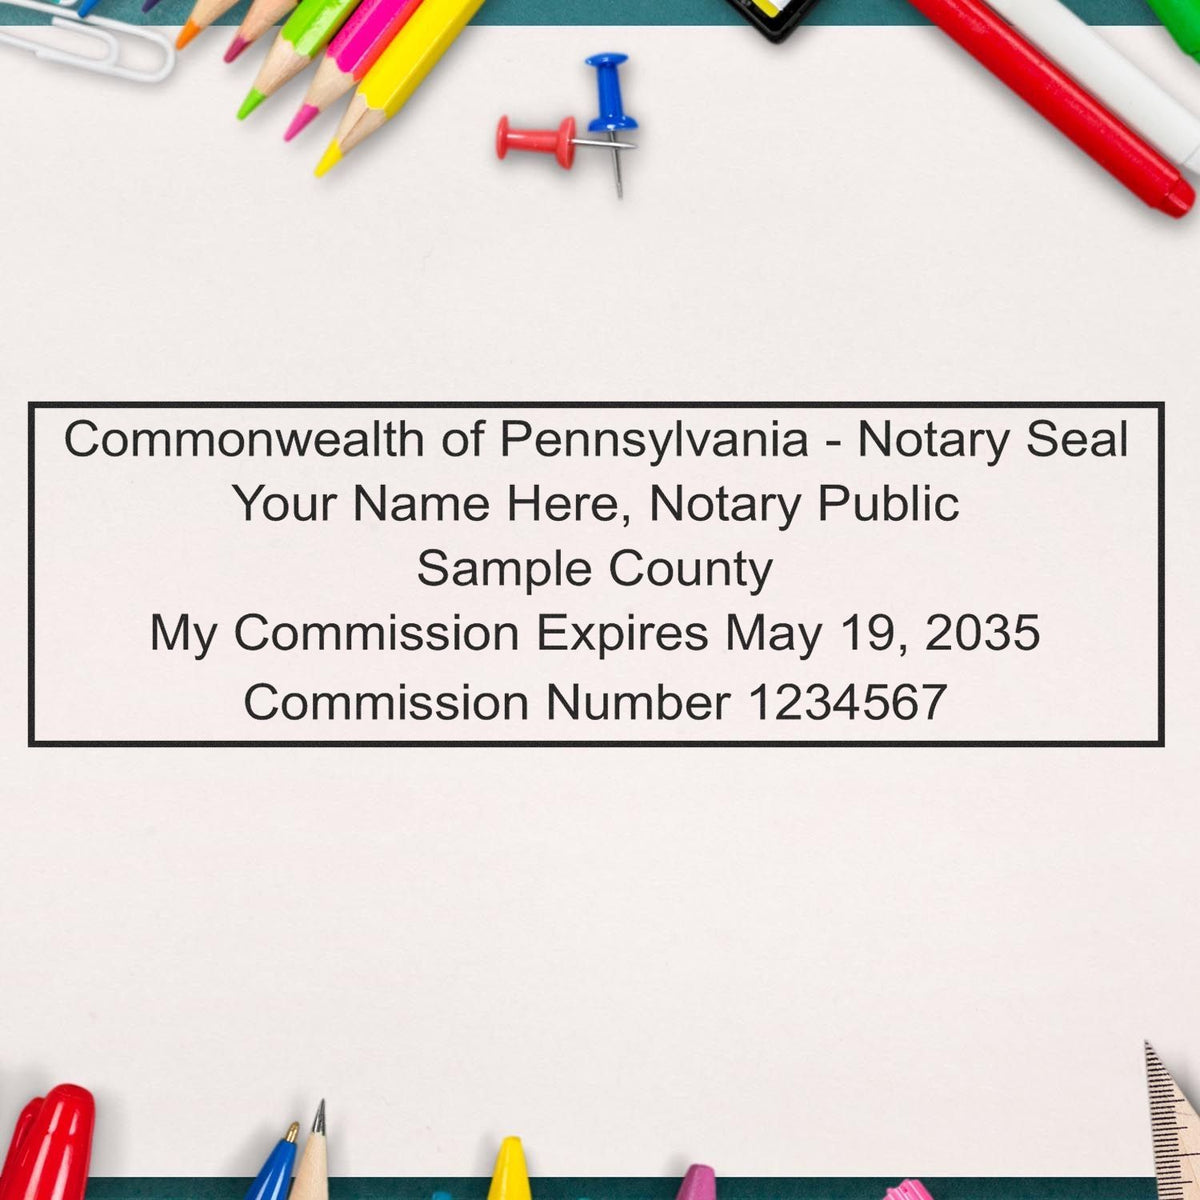 PSI Pennsylvania Notary Stamp in use photo showing a stamped imprint of the PSI Pennsylvania Notary Stamp